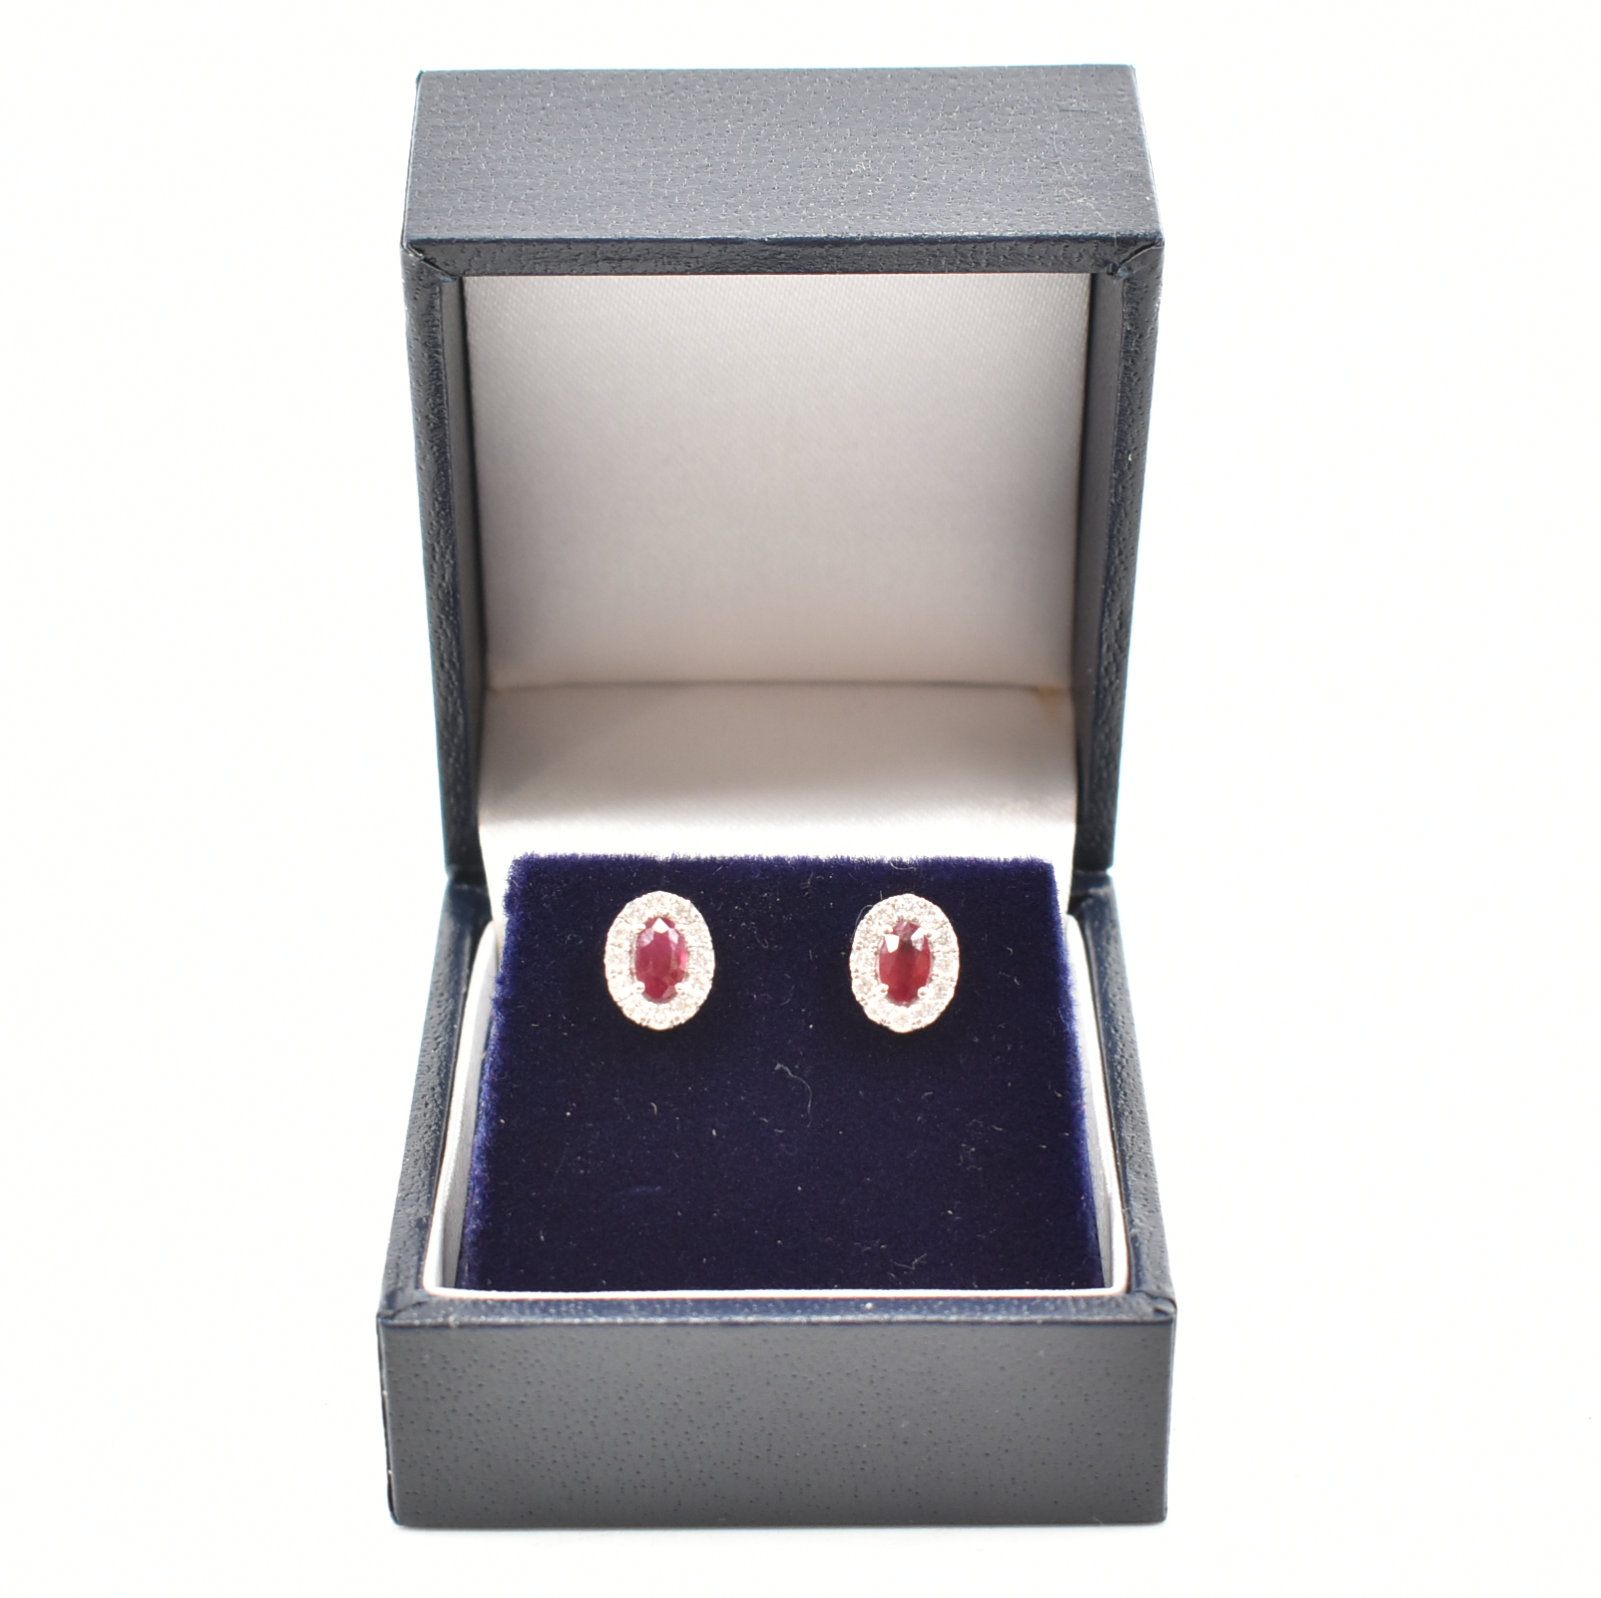 18CT WHITE GOLD DIAMOND & RED STONE HALO EARRINGS - Image 4 of 4